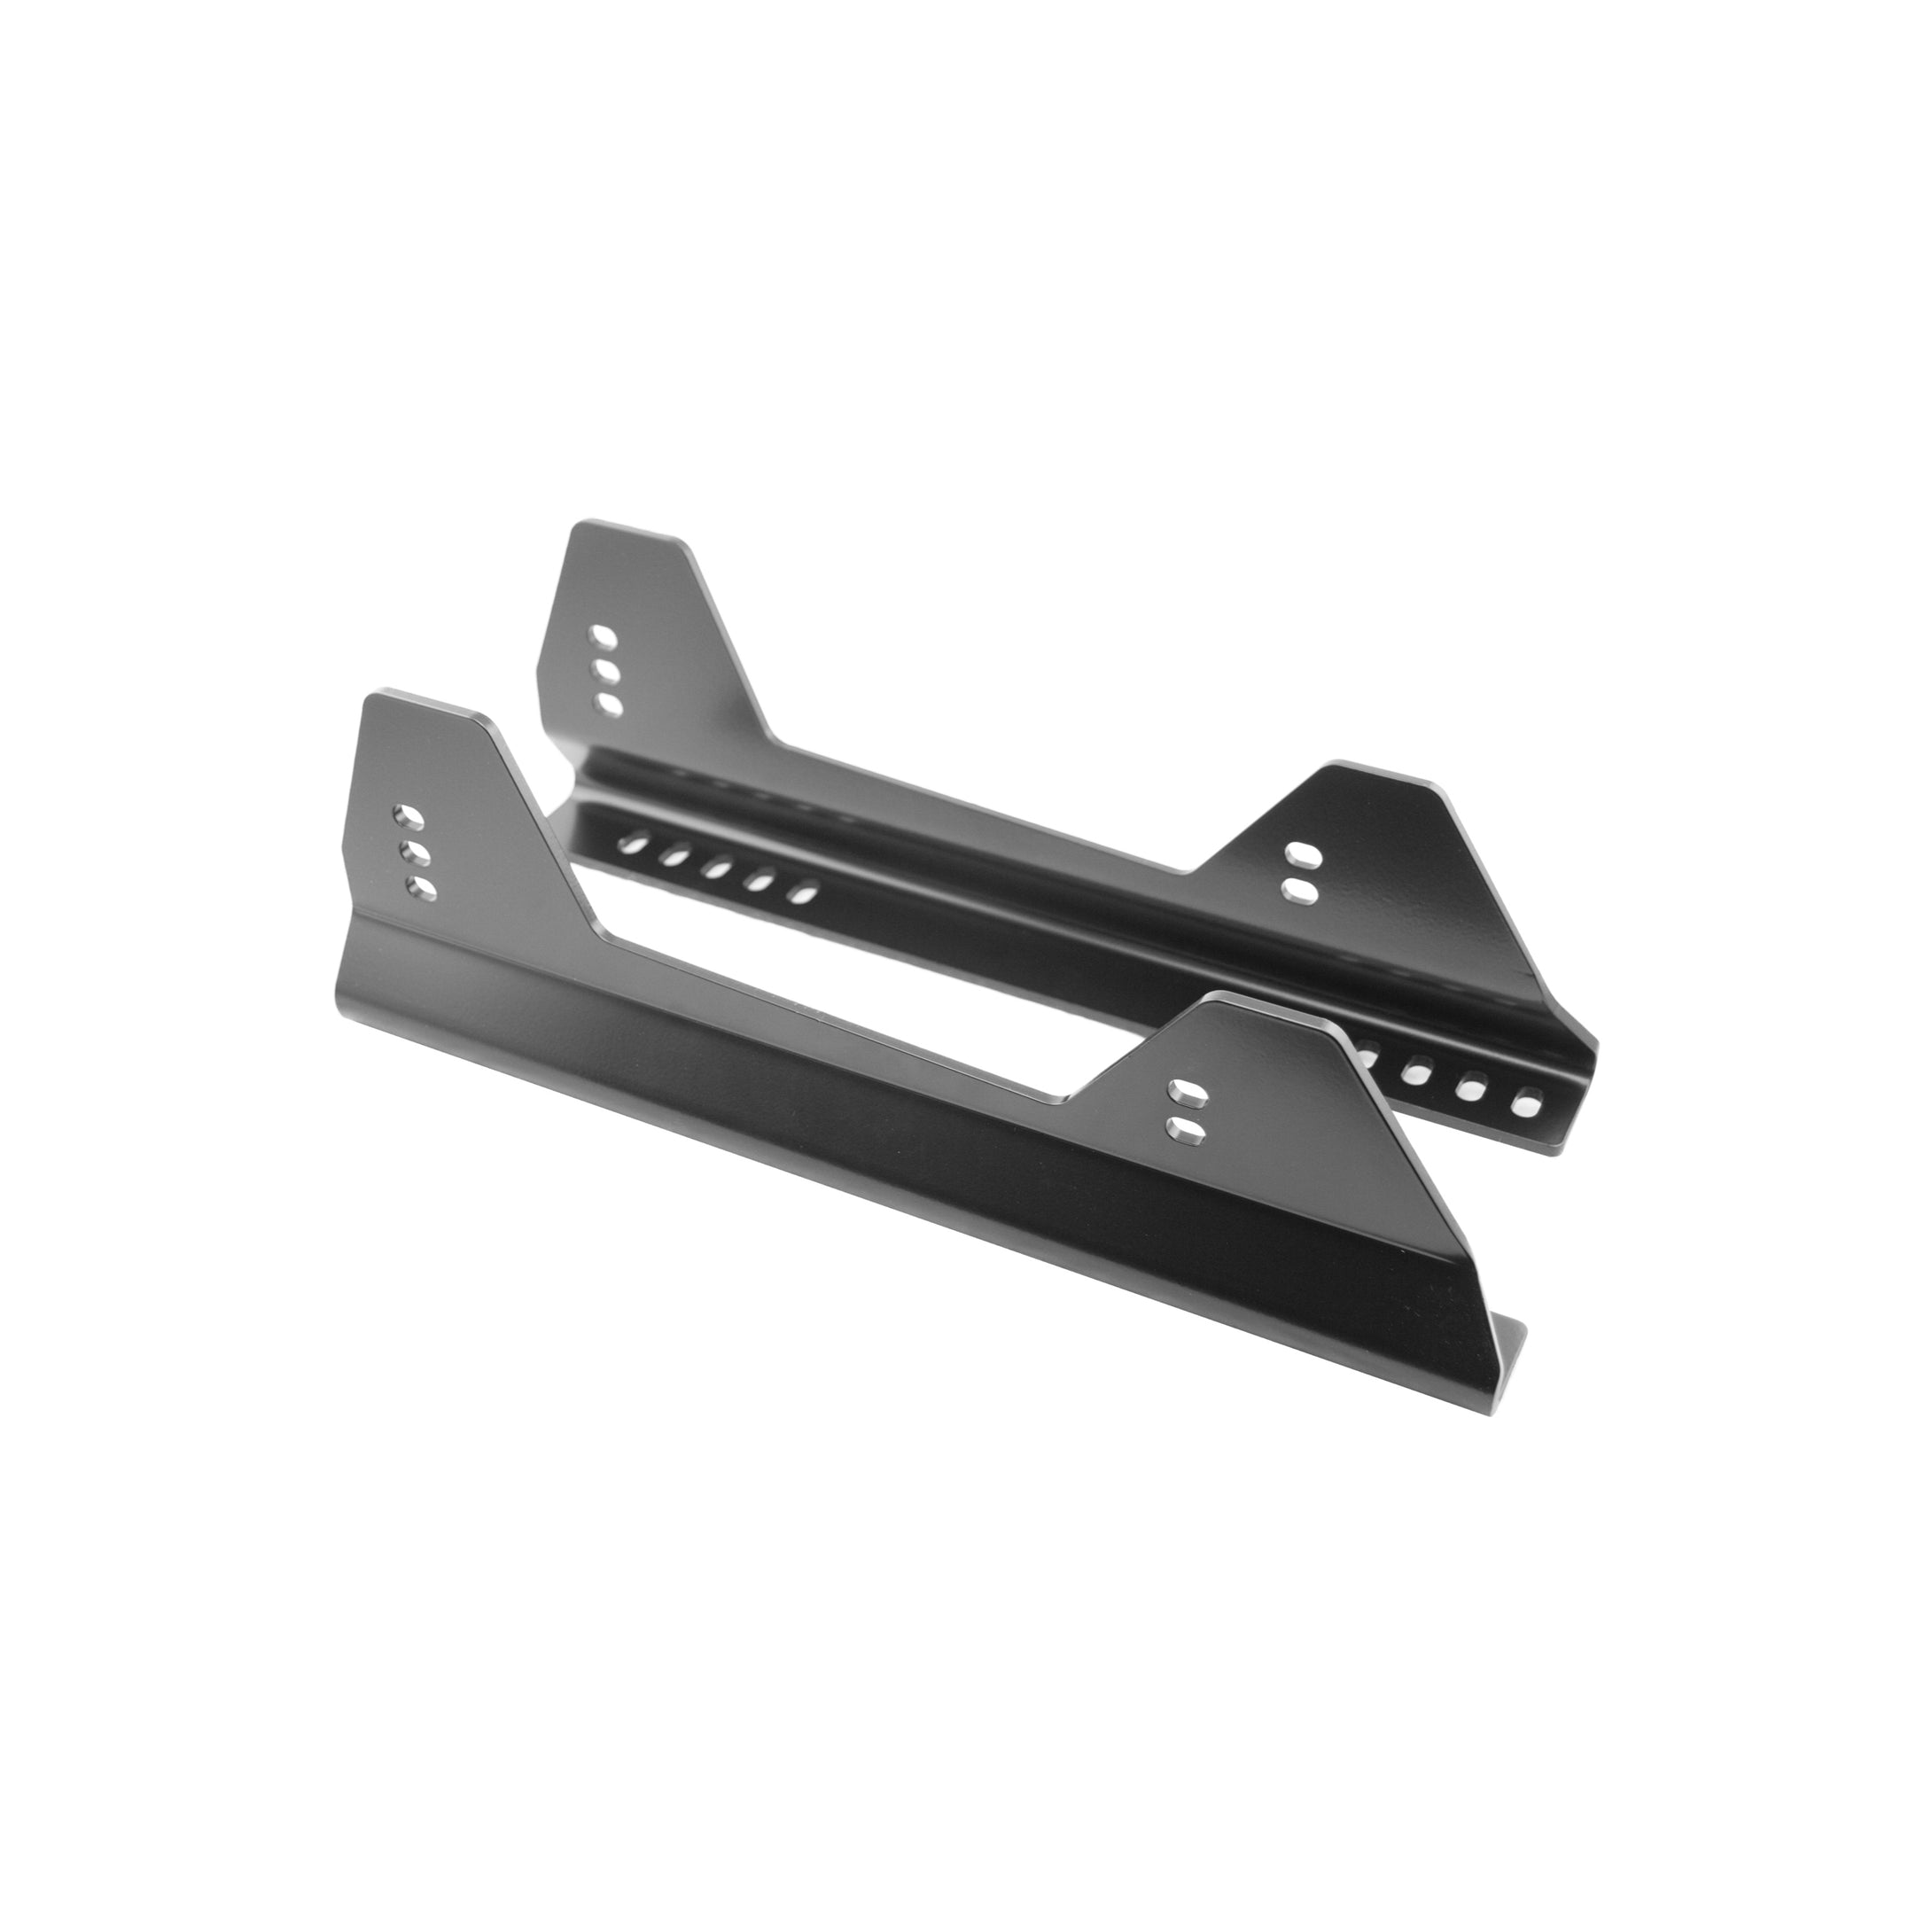 Cobra Side Plates: Low Alloy Side Plates